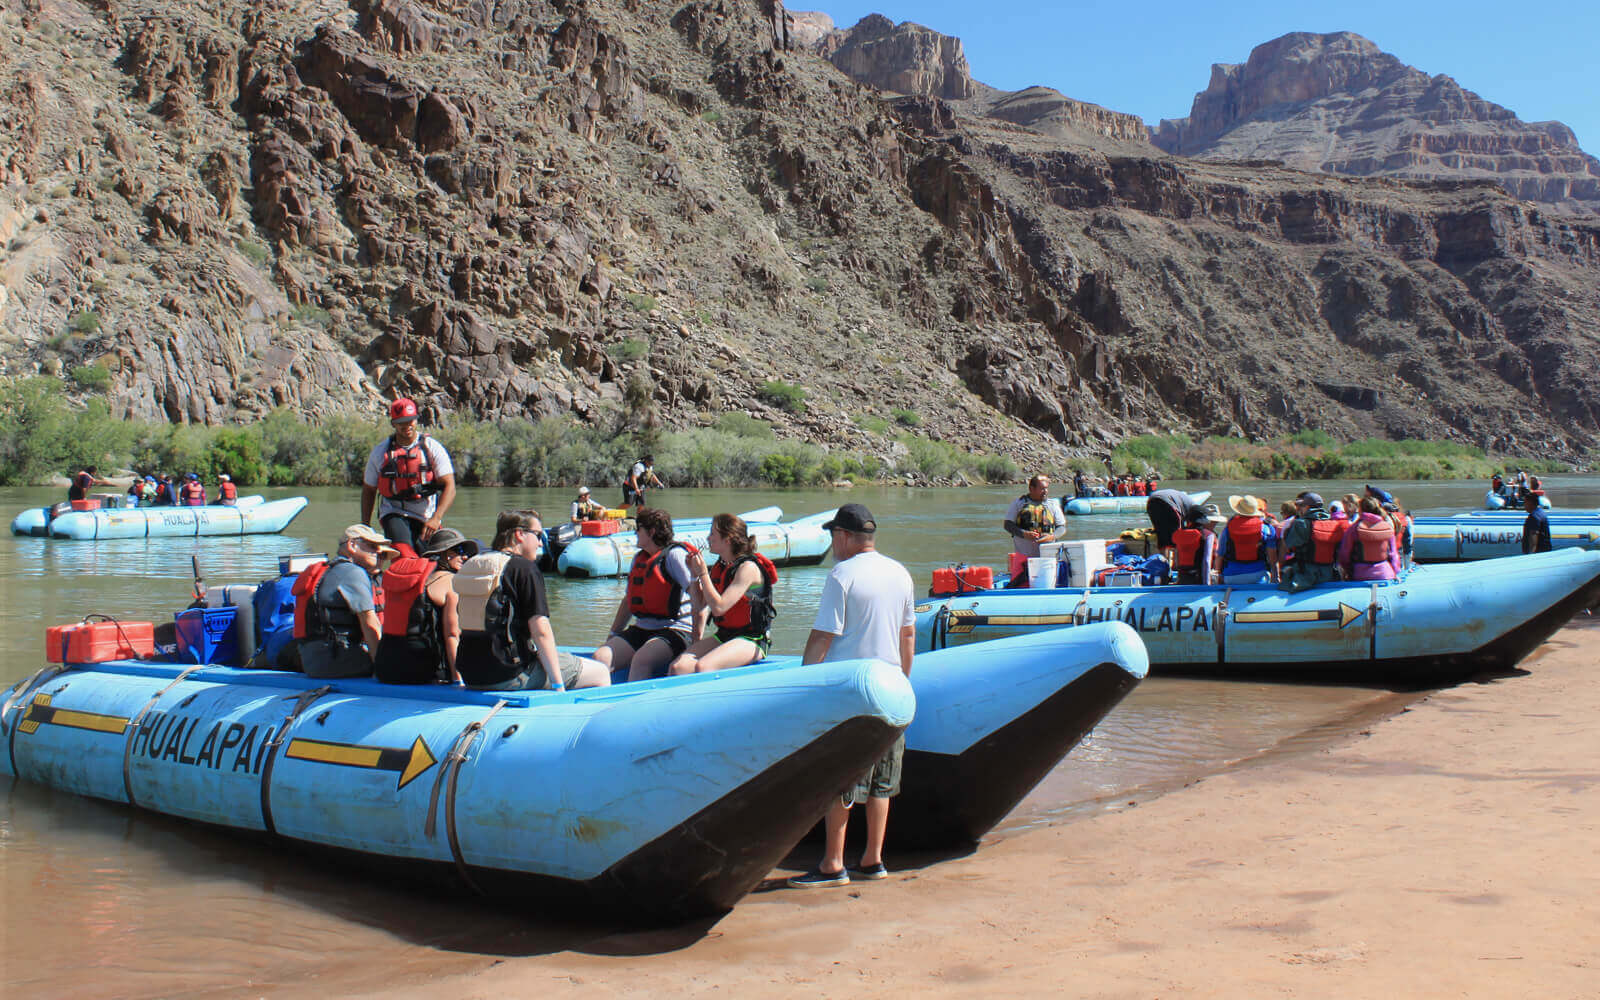 Colorado River Rafting with the Hualapai River Runners